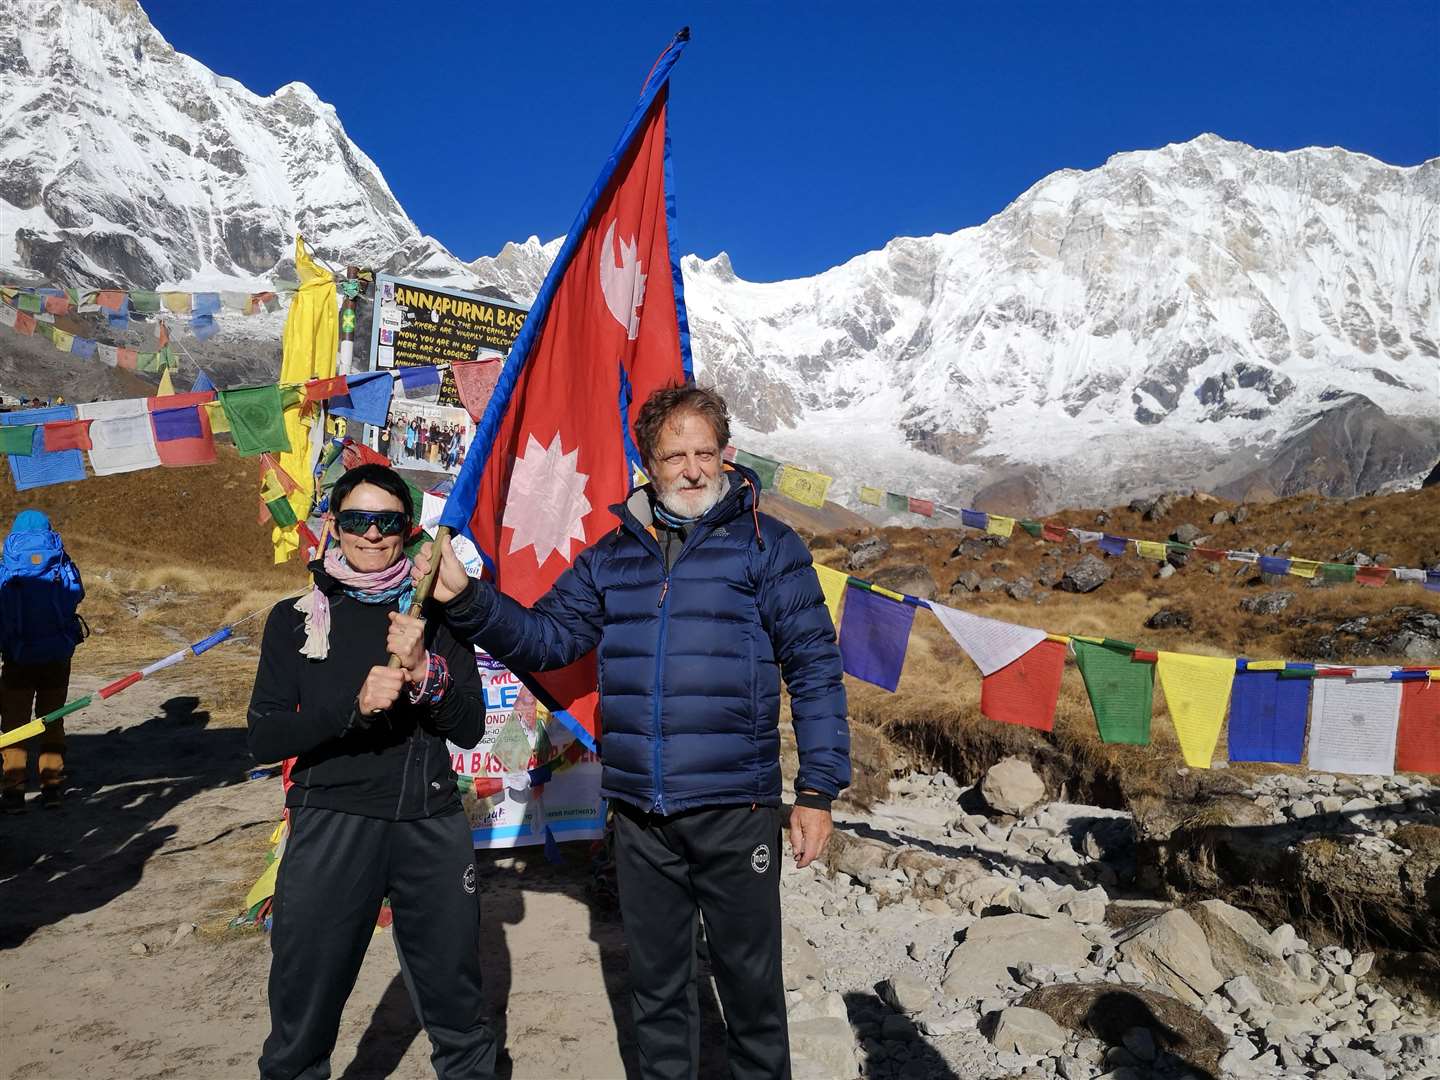 Jim and Gill Robertson, pictured here at Annapurna base camp during their Nepal trip, were upset to learn about the death of Ramdal Rani for whom they were fundraising.